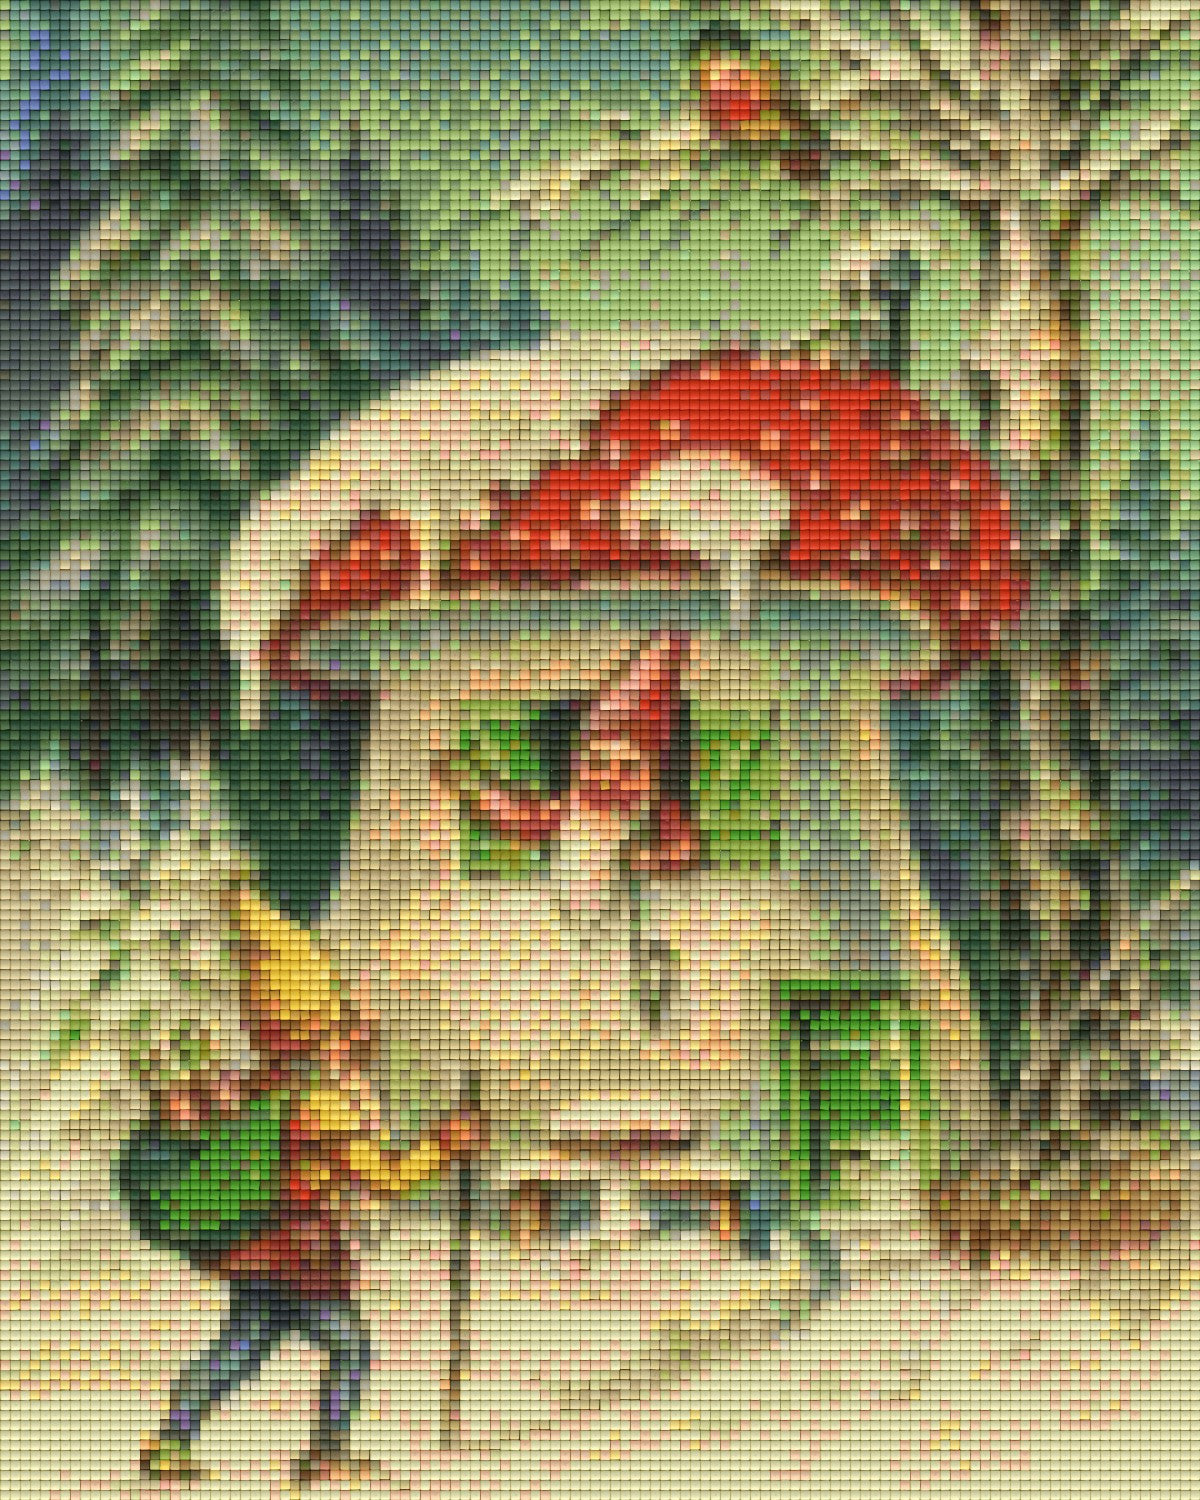 Pixel hobby classic set - toadstool house in the snow